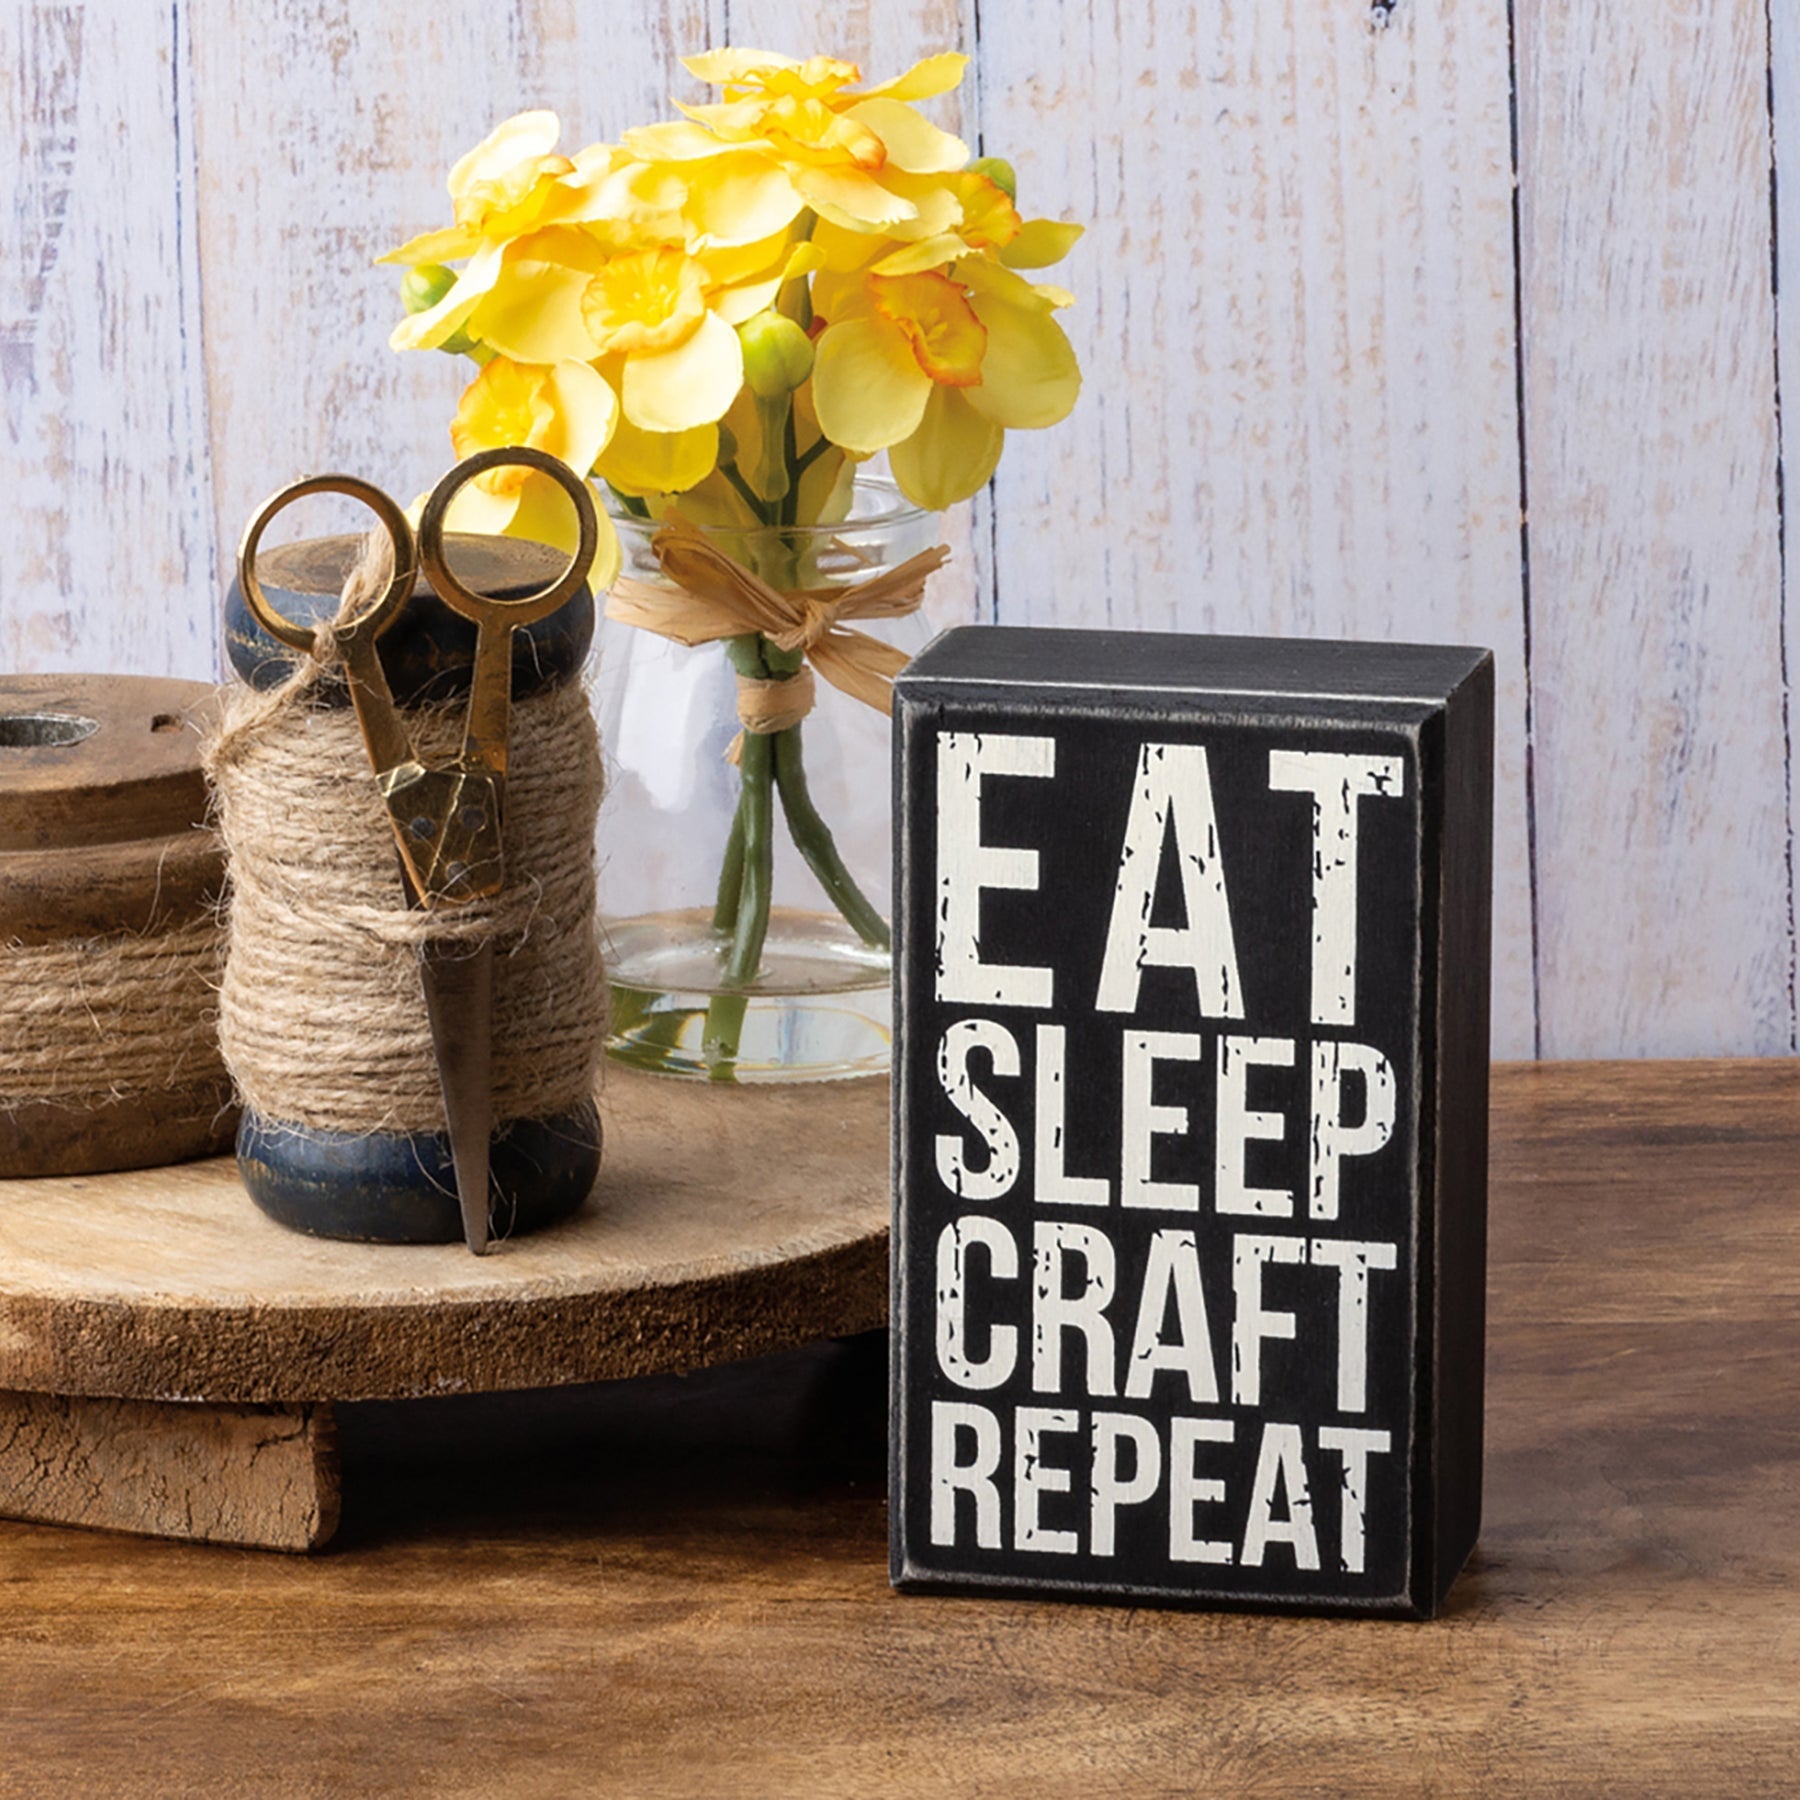 Eat Sleep Craft Repeat Wooden Box Sign, Funny/Rustic/Modern Quote Wall Art, Living/Dining/Bedroom, Cute Farmhouse Decor